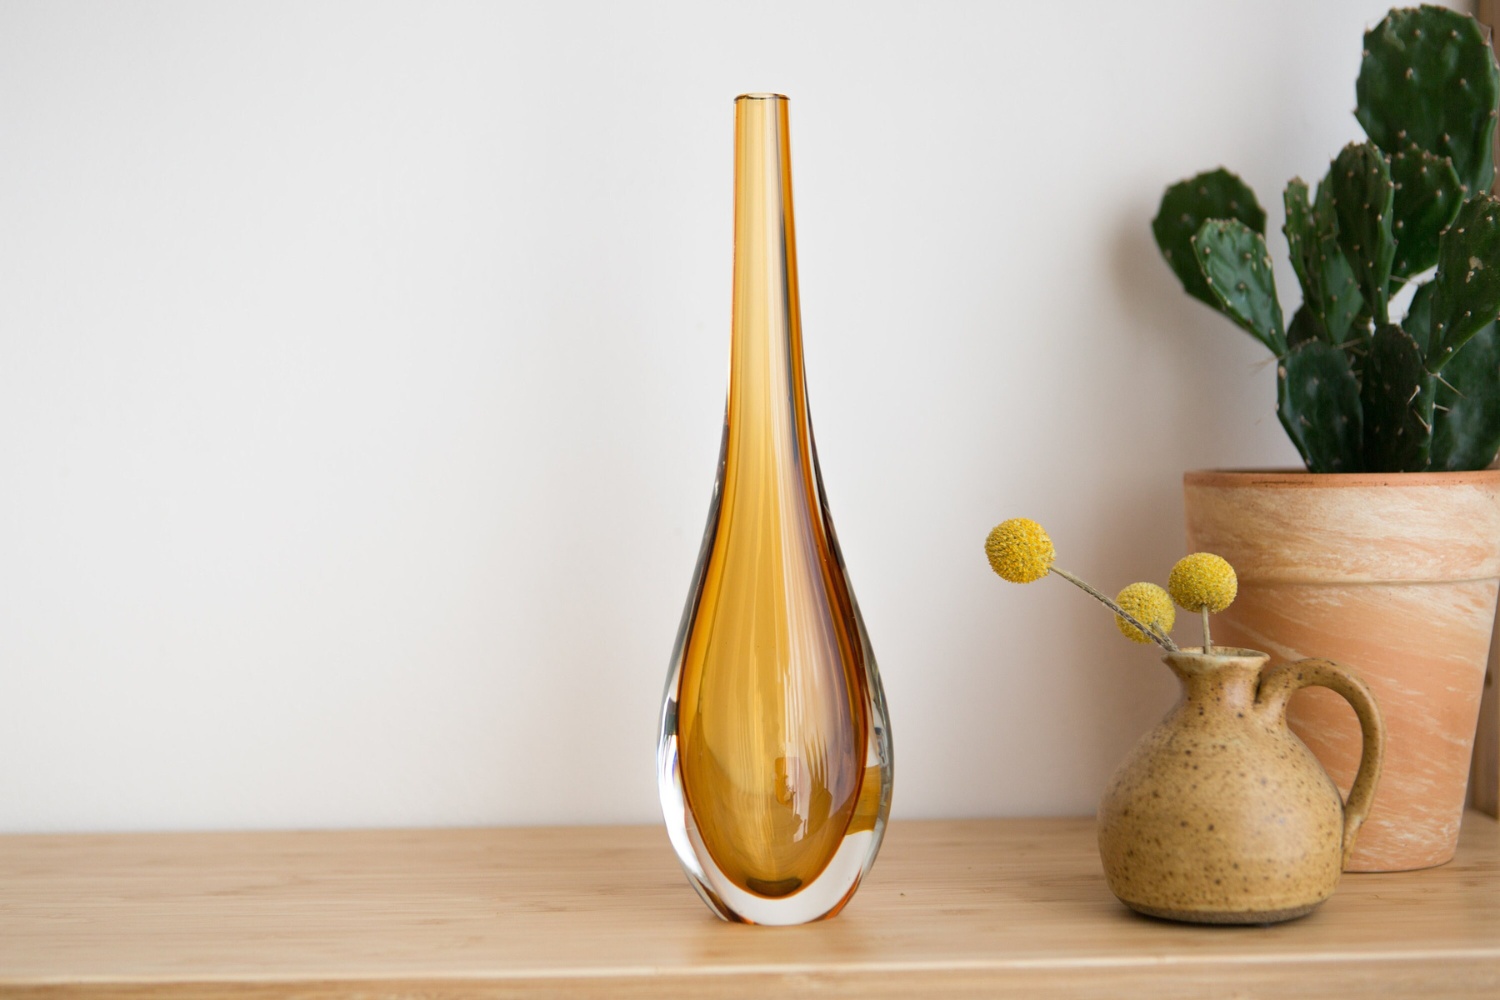 How To Clean Glass Vases With Narrow Necks